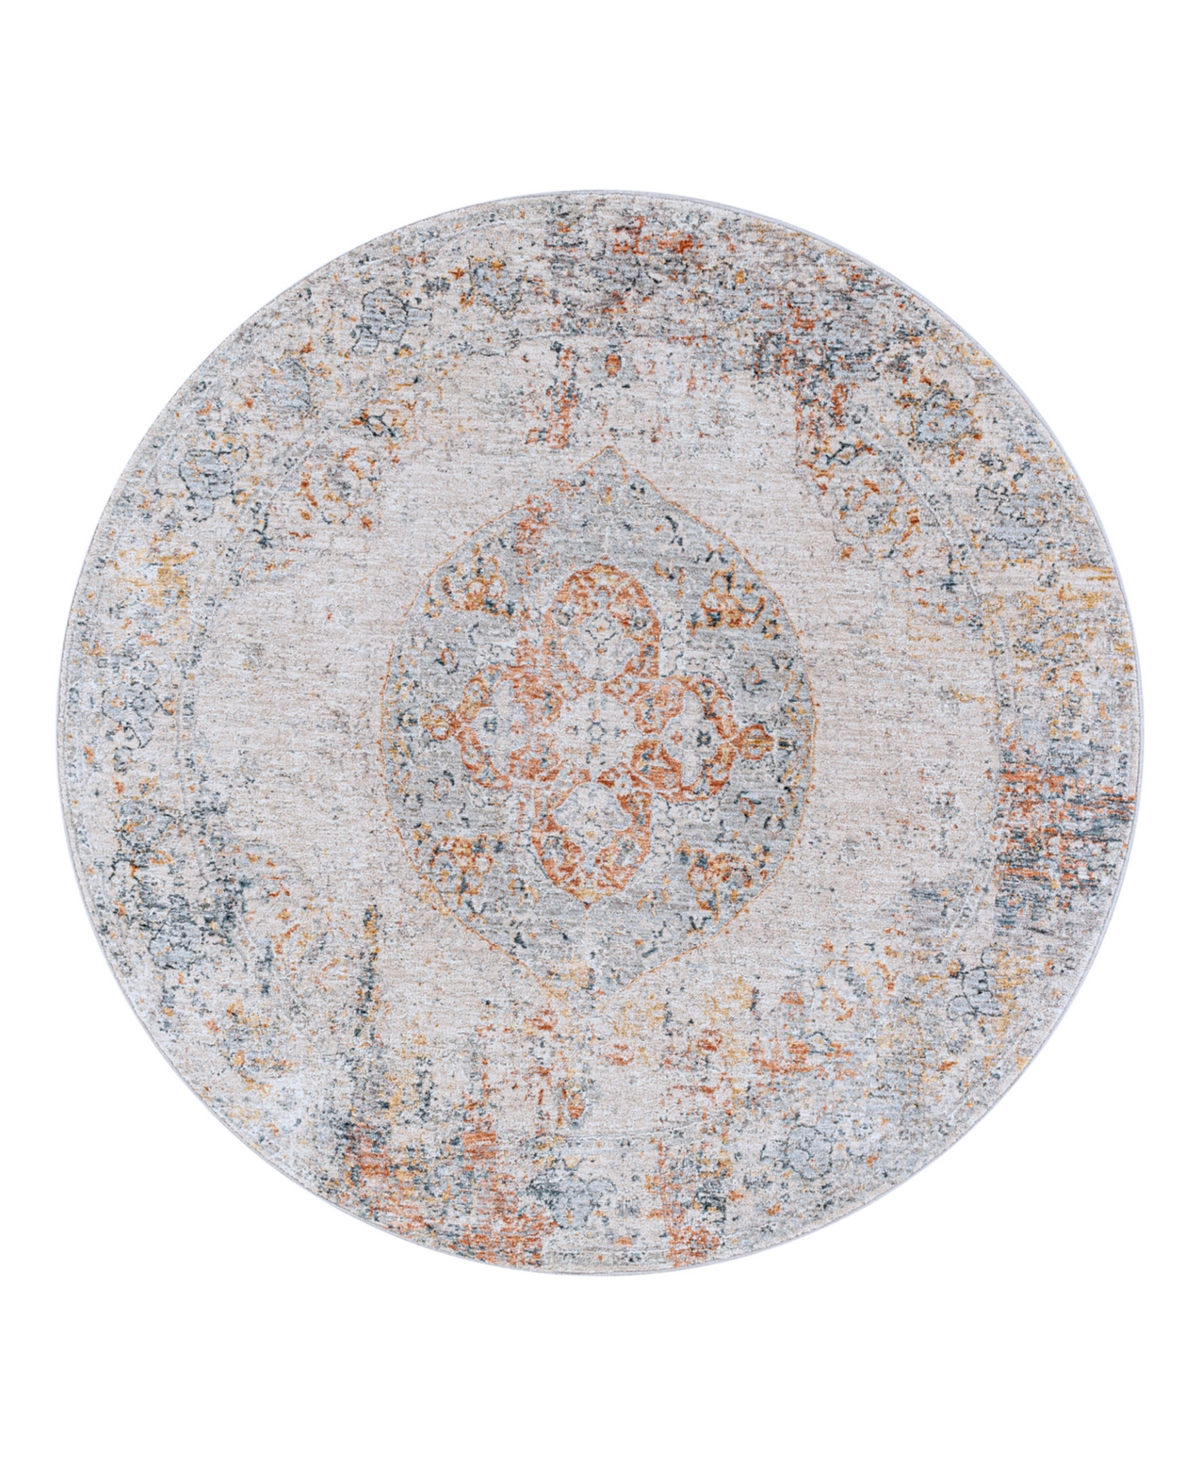 Surya Laila Laa-2306 7'10x7'10 Round Area Rug In Red